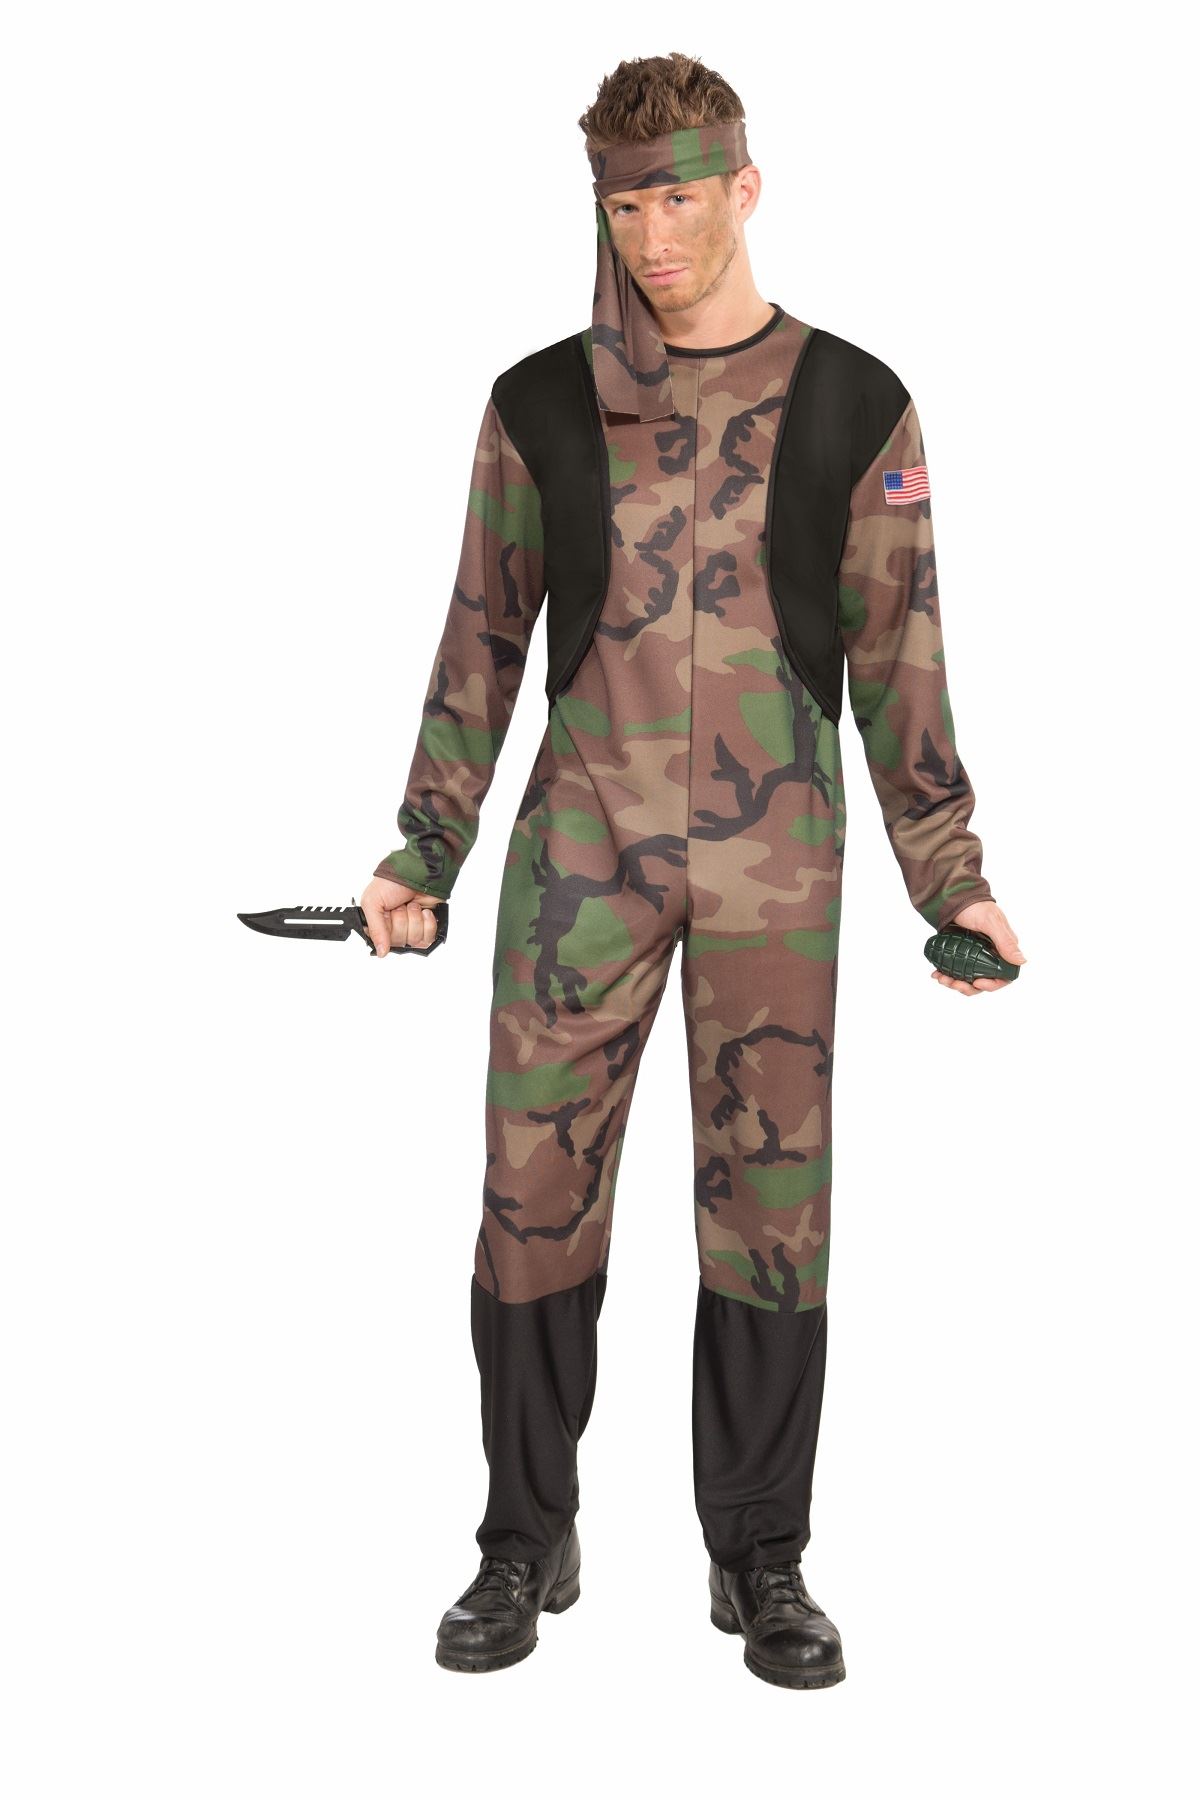 Adult Army Soldier Men Costume | $19.99 | The Costume Land